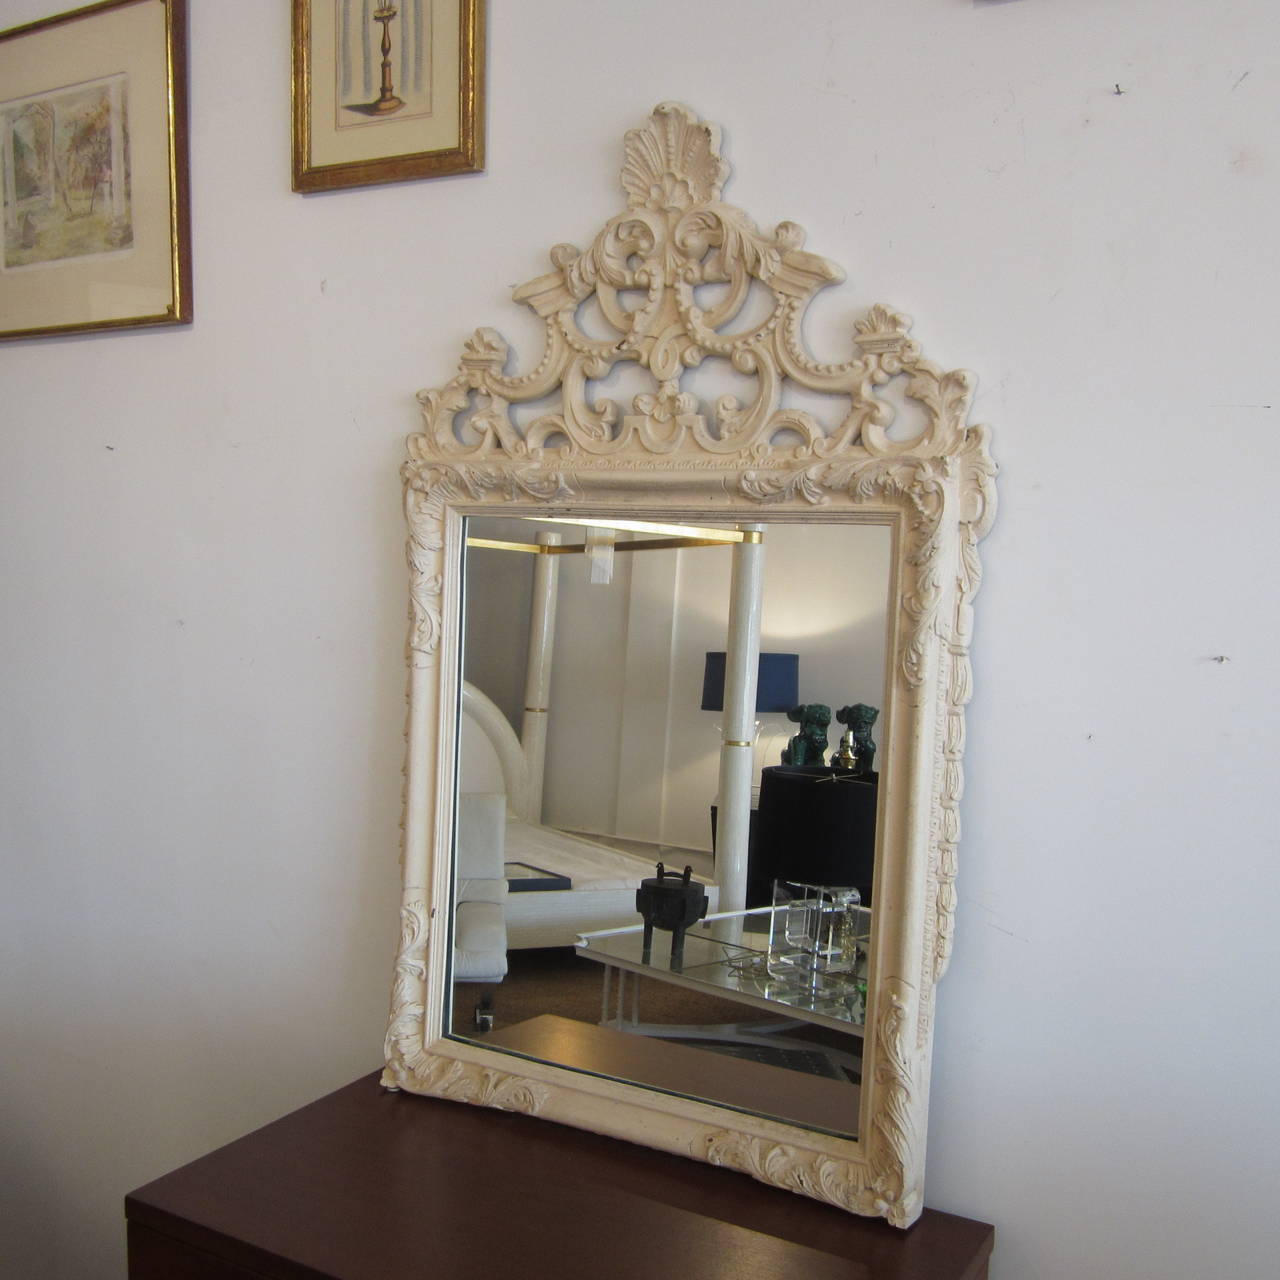 Fantastic heavily carved mirror in its original raw state ready to be finished to your request. Can be a showstopper gilded or painted a bold color. The glass was replaced and a new wood backing was put on before we acquired it. 